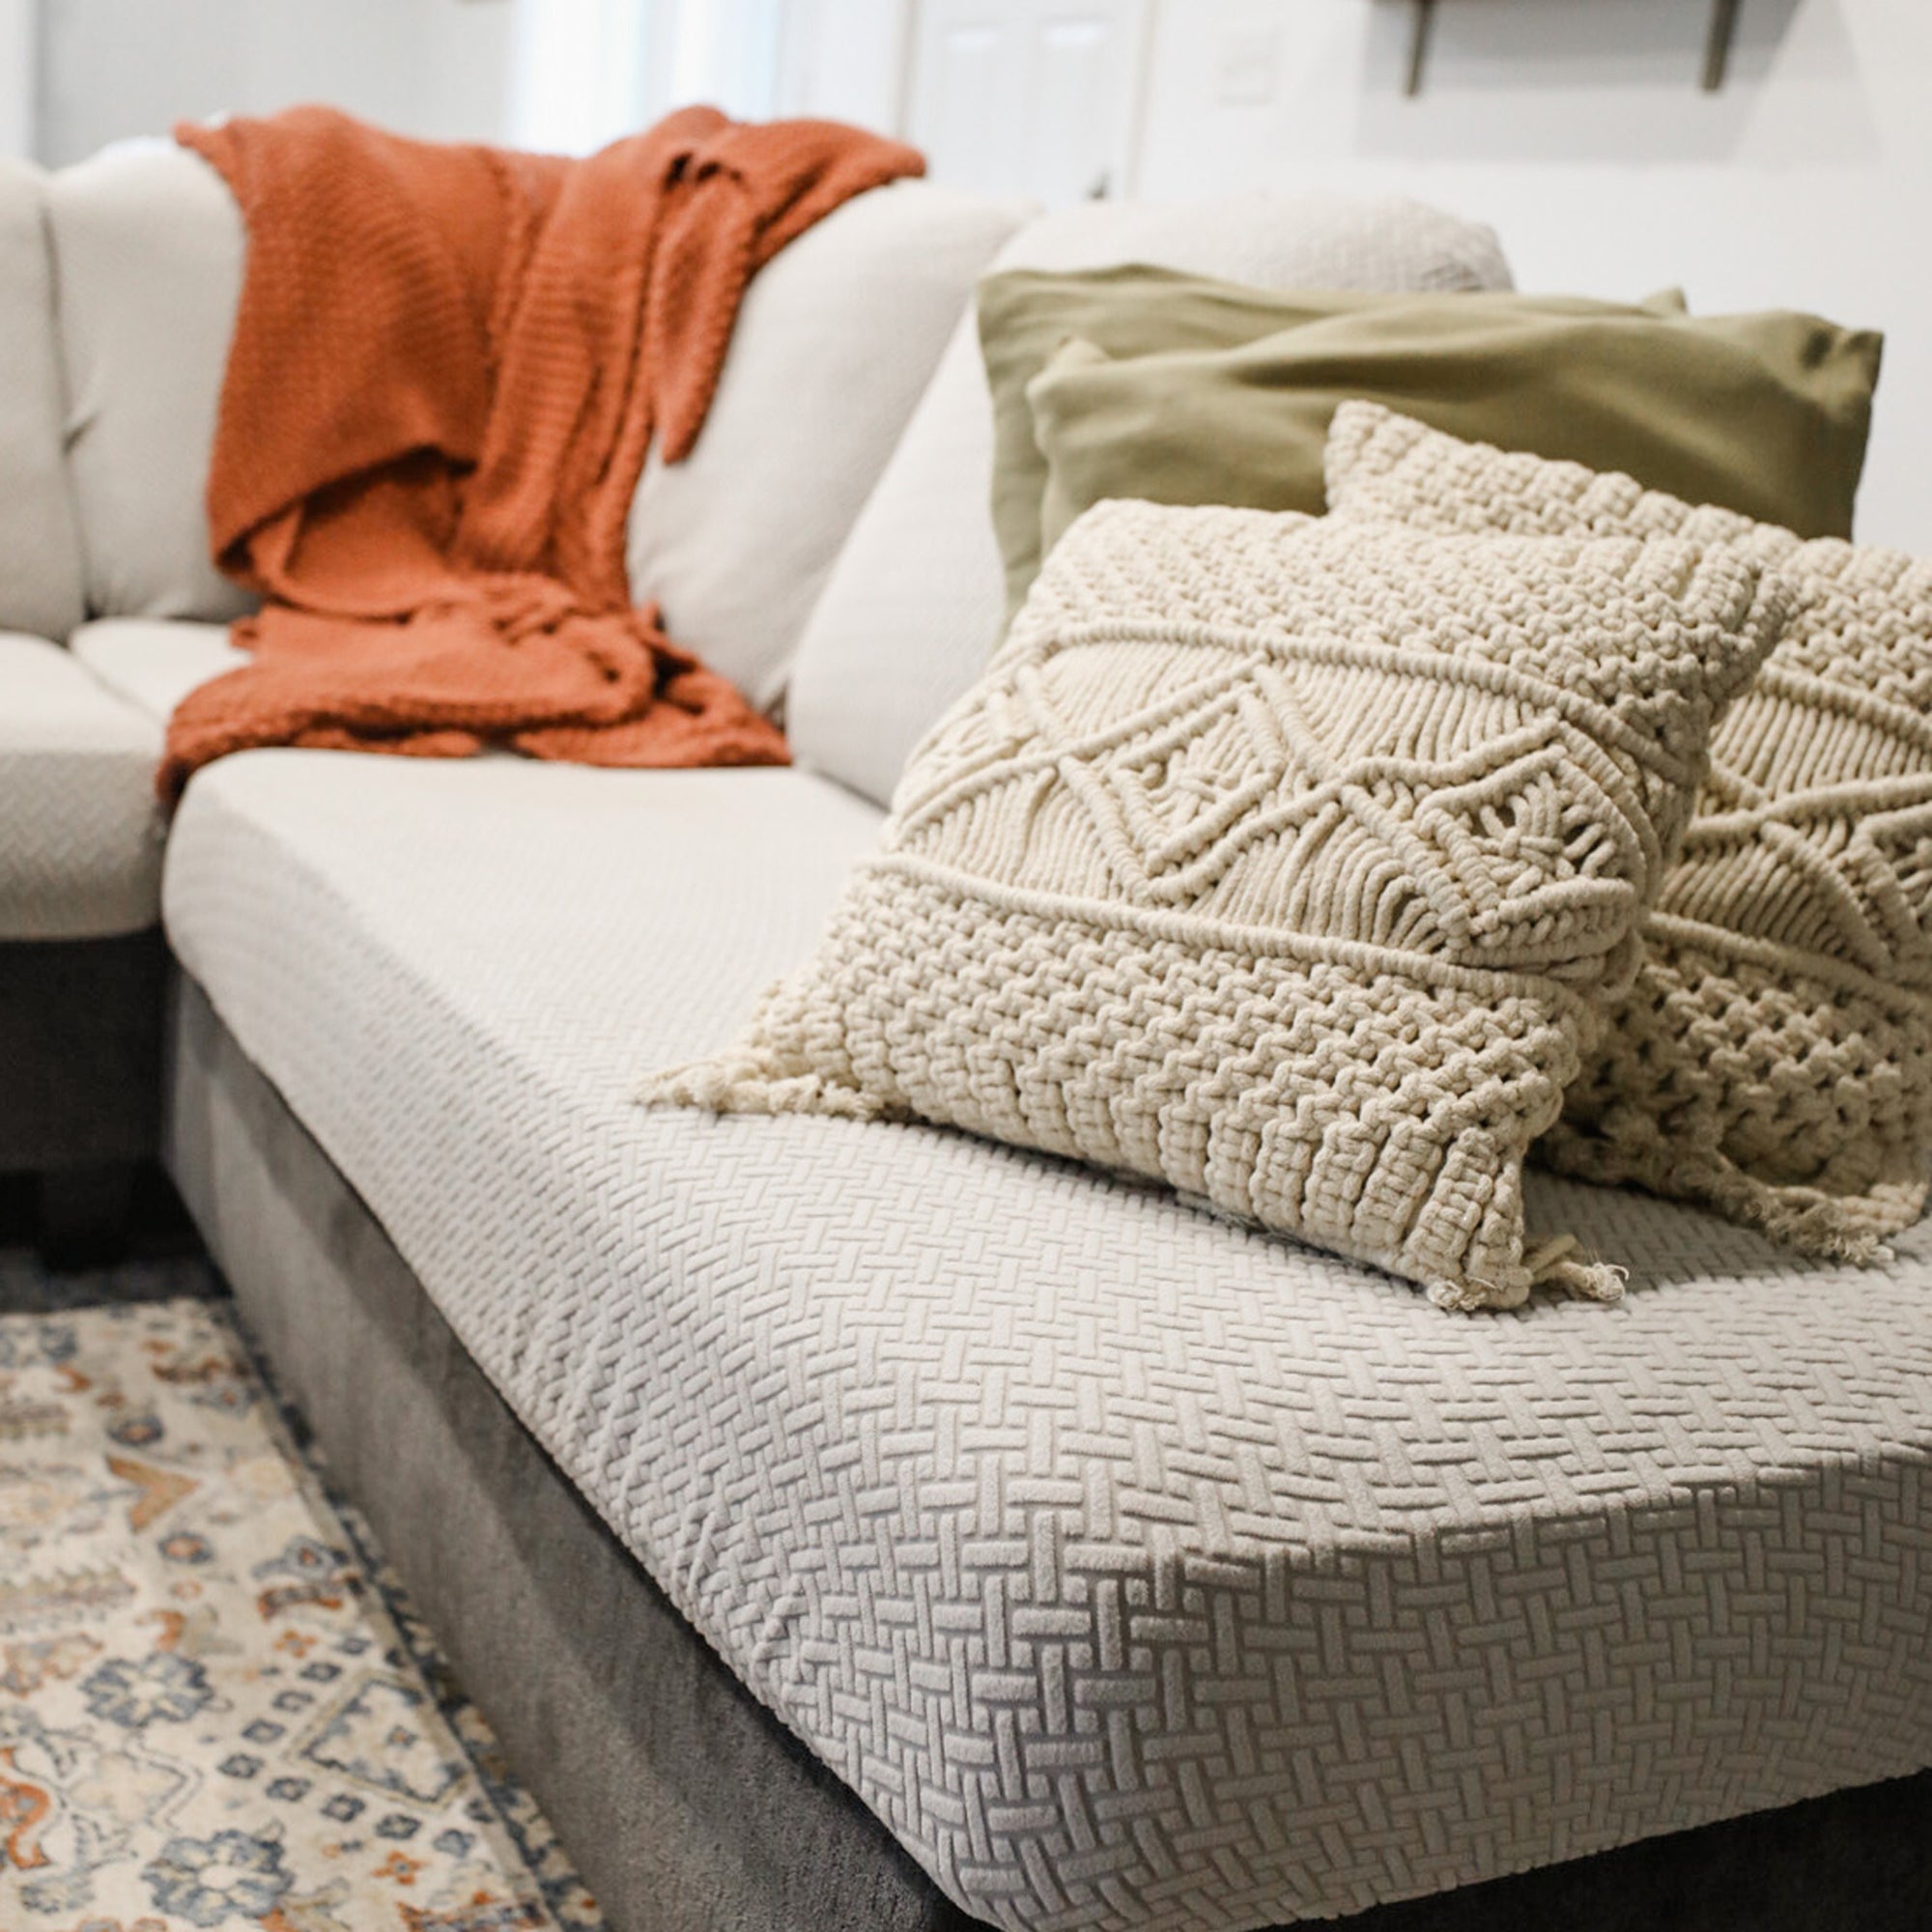 Sofa Care 101: How to Prevent Wear and Tear Damage